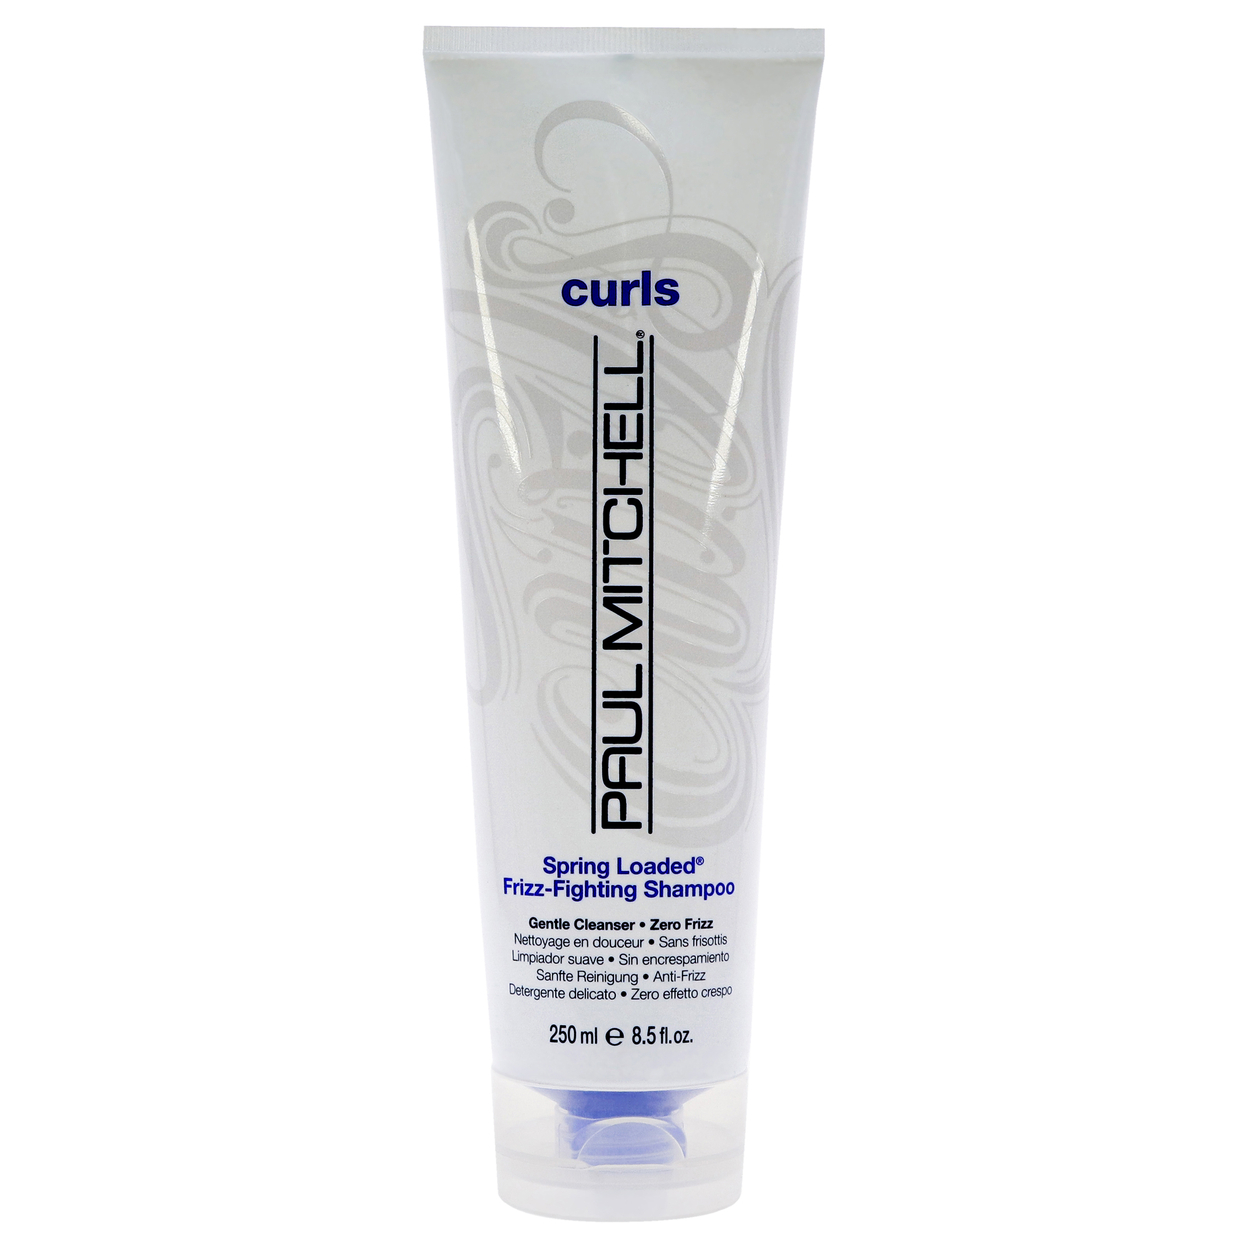 Paul Mitchell Unisex HAIRCARE Curls Spring Loaded Frizz-Fighting Shampoo 8.5 Oz